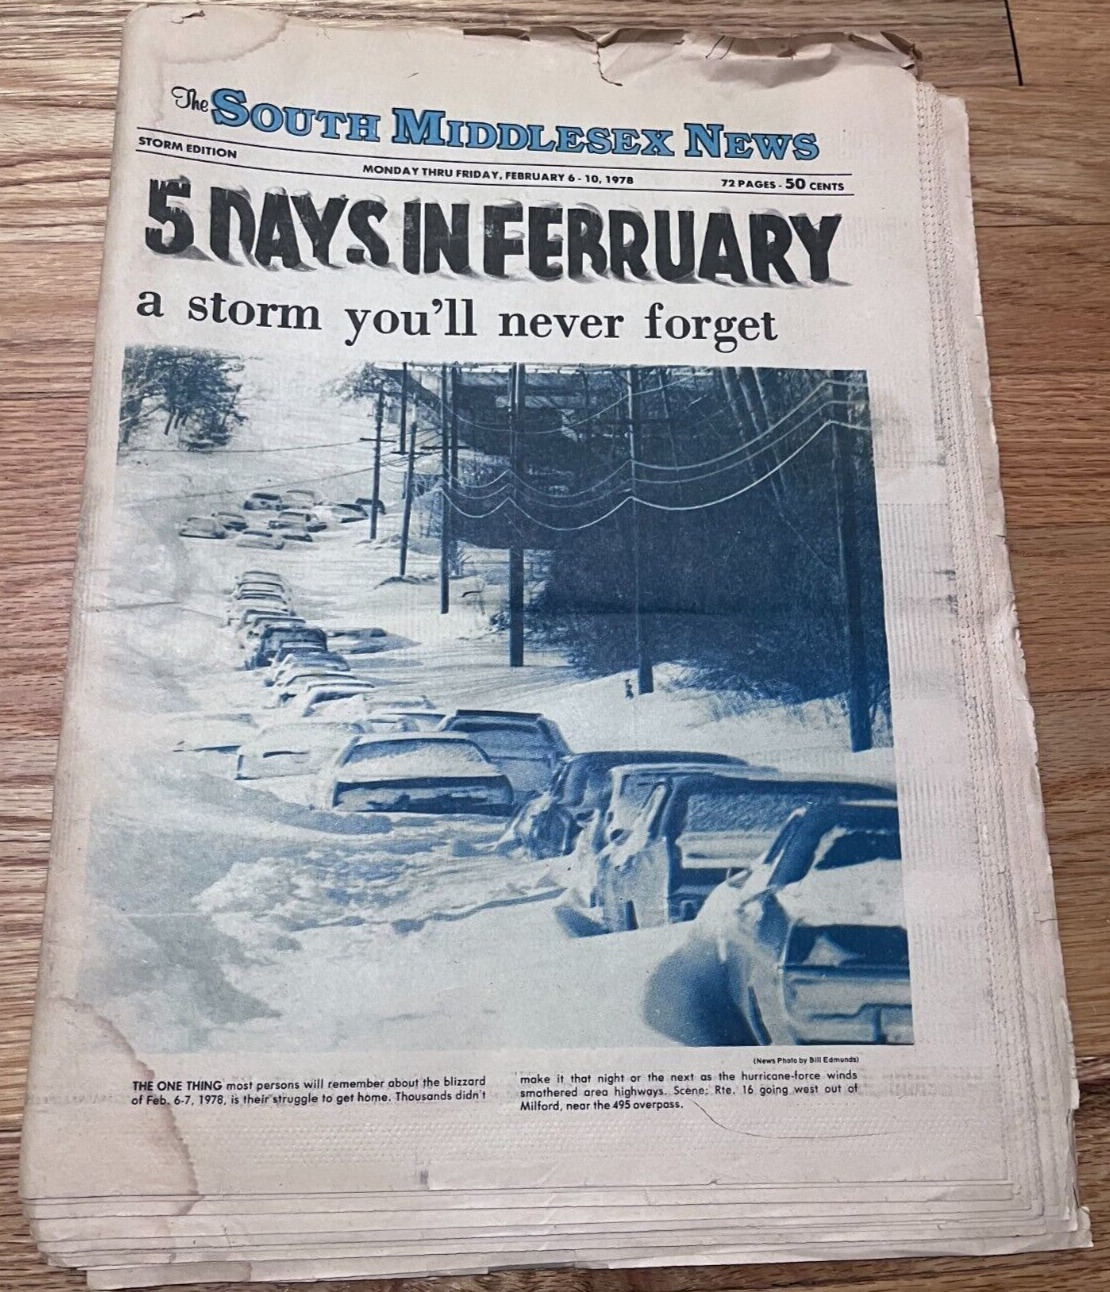 Blizzard of 1978 South Middlesex News MA STORM EDITION newspaper Feb 6-10 1978